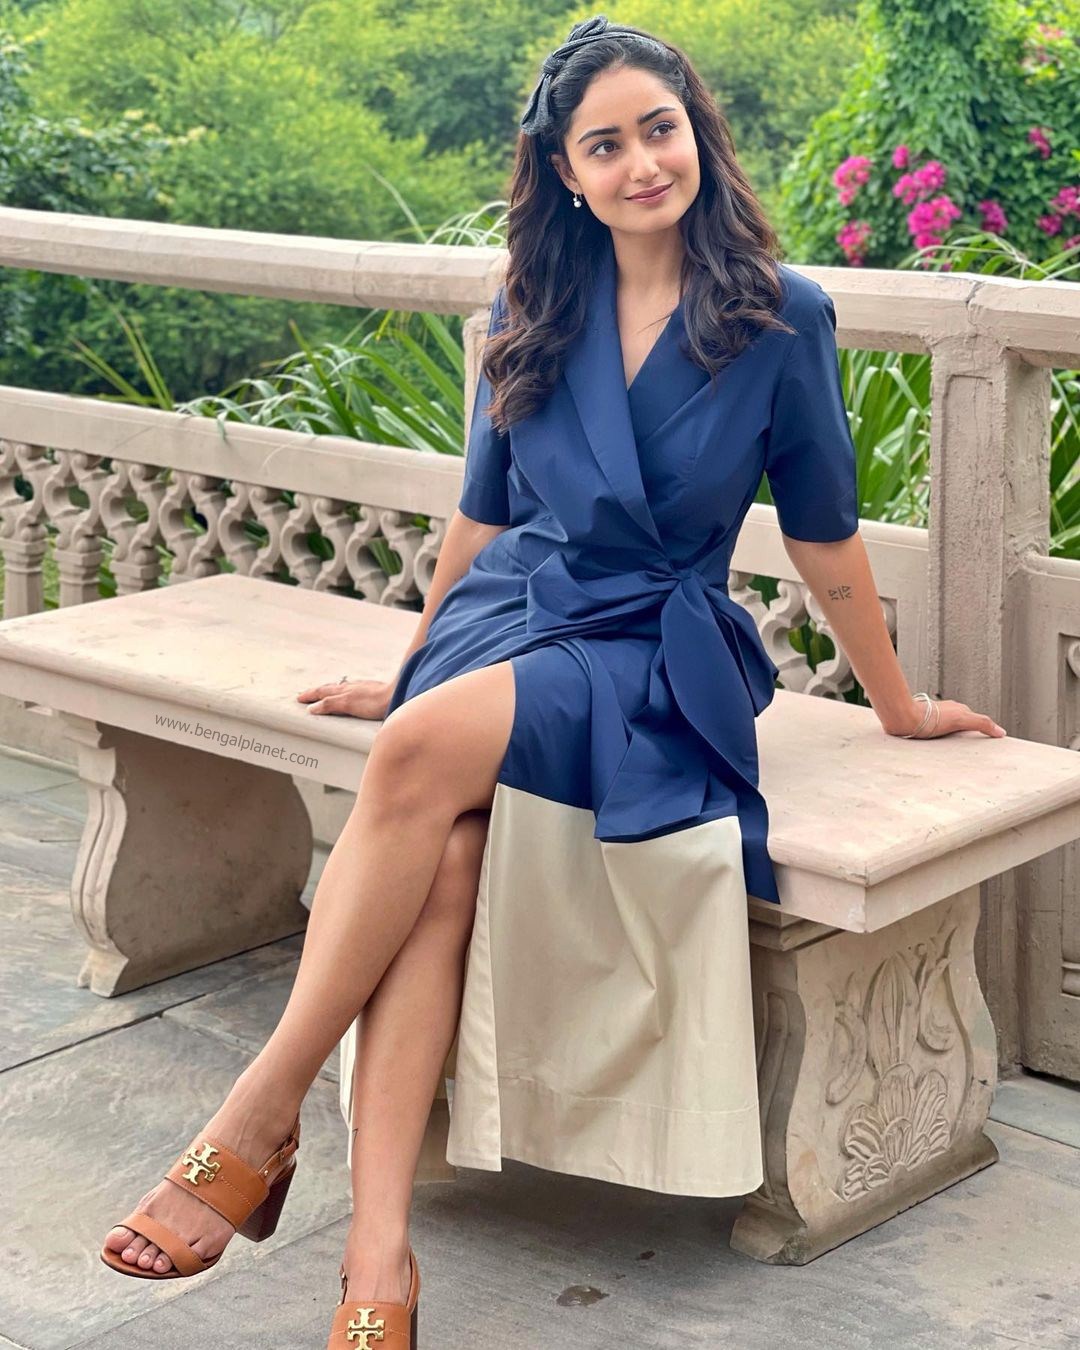 Tridha-Choudhury-looks-chic-hot-and-classy-in-these-pictures-83-Bengalplanet.com